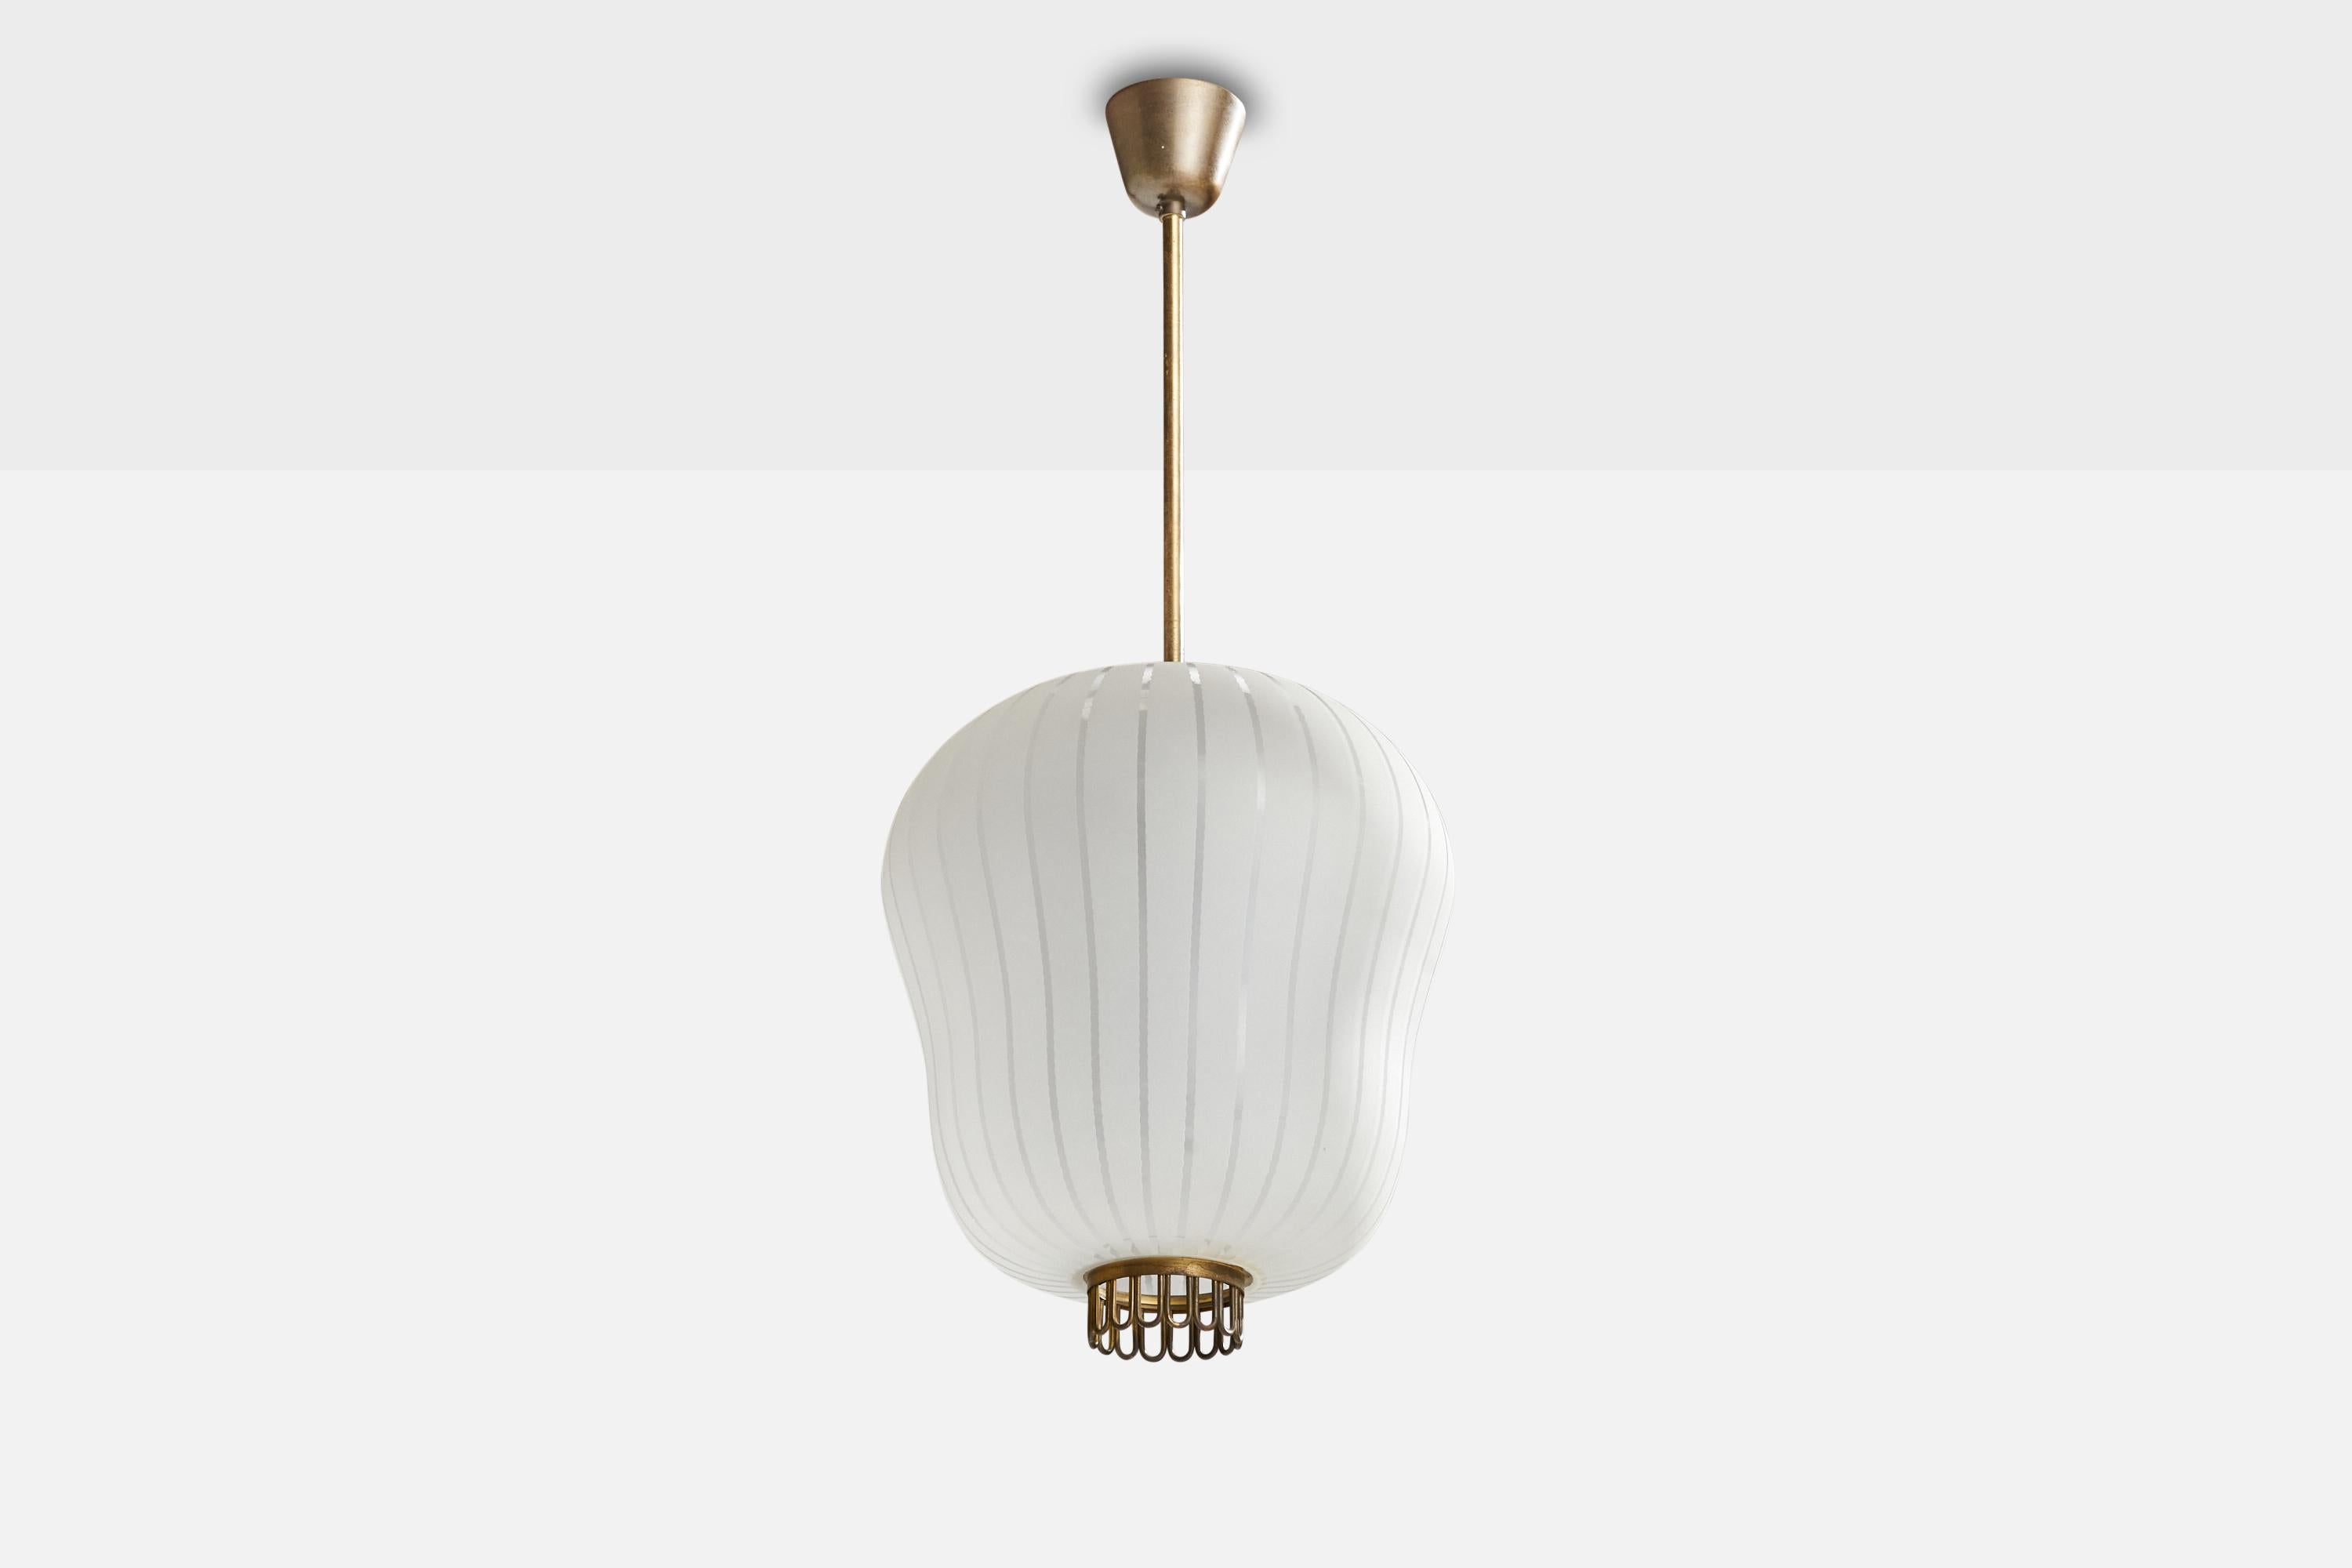 A brass and etched glass pendant light designed and produced by Orrefors, Sweden, 1940s.

Dimensions of canopy (inches): 3.25” H x 4.25” Diameter
Socket takes standard E-26 bulbs. 1 socket.There is no maximum wattage stated on the fixture. All